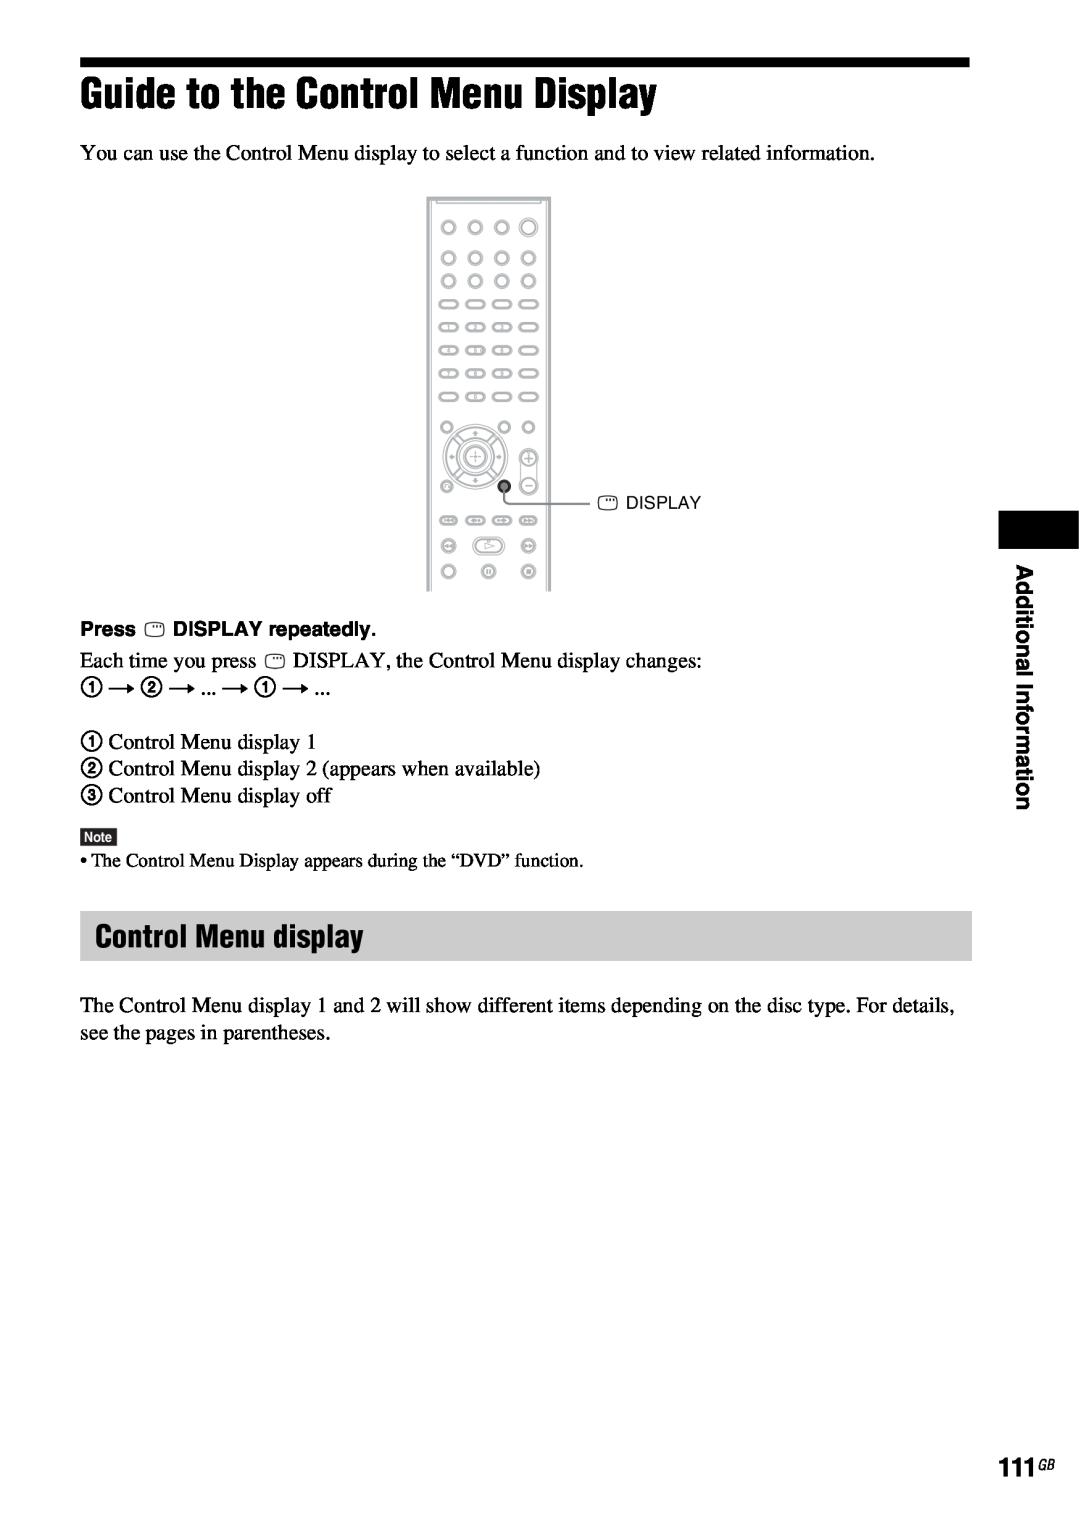 Sony DAV-HDX685 Guide to the Control Menu Display, Control Menu display, Additional Information, Press DISPLAY repeatedly 